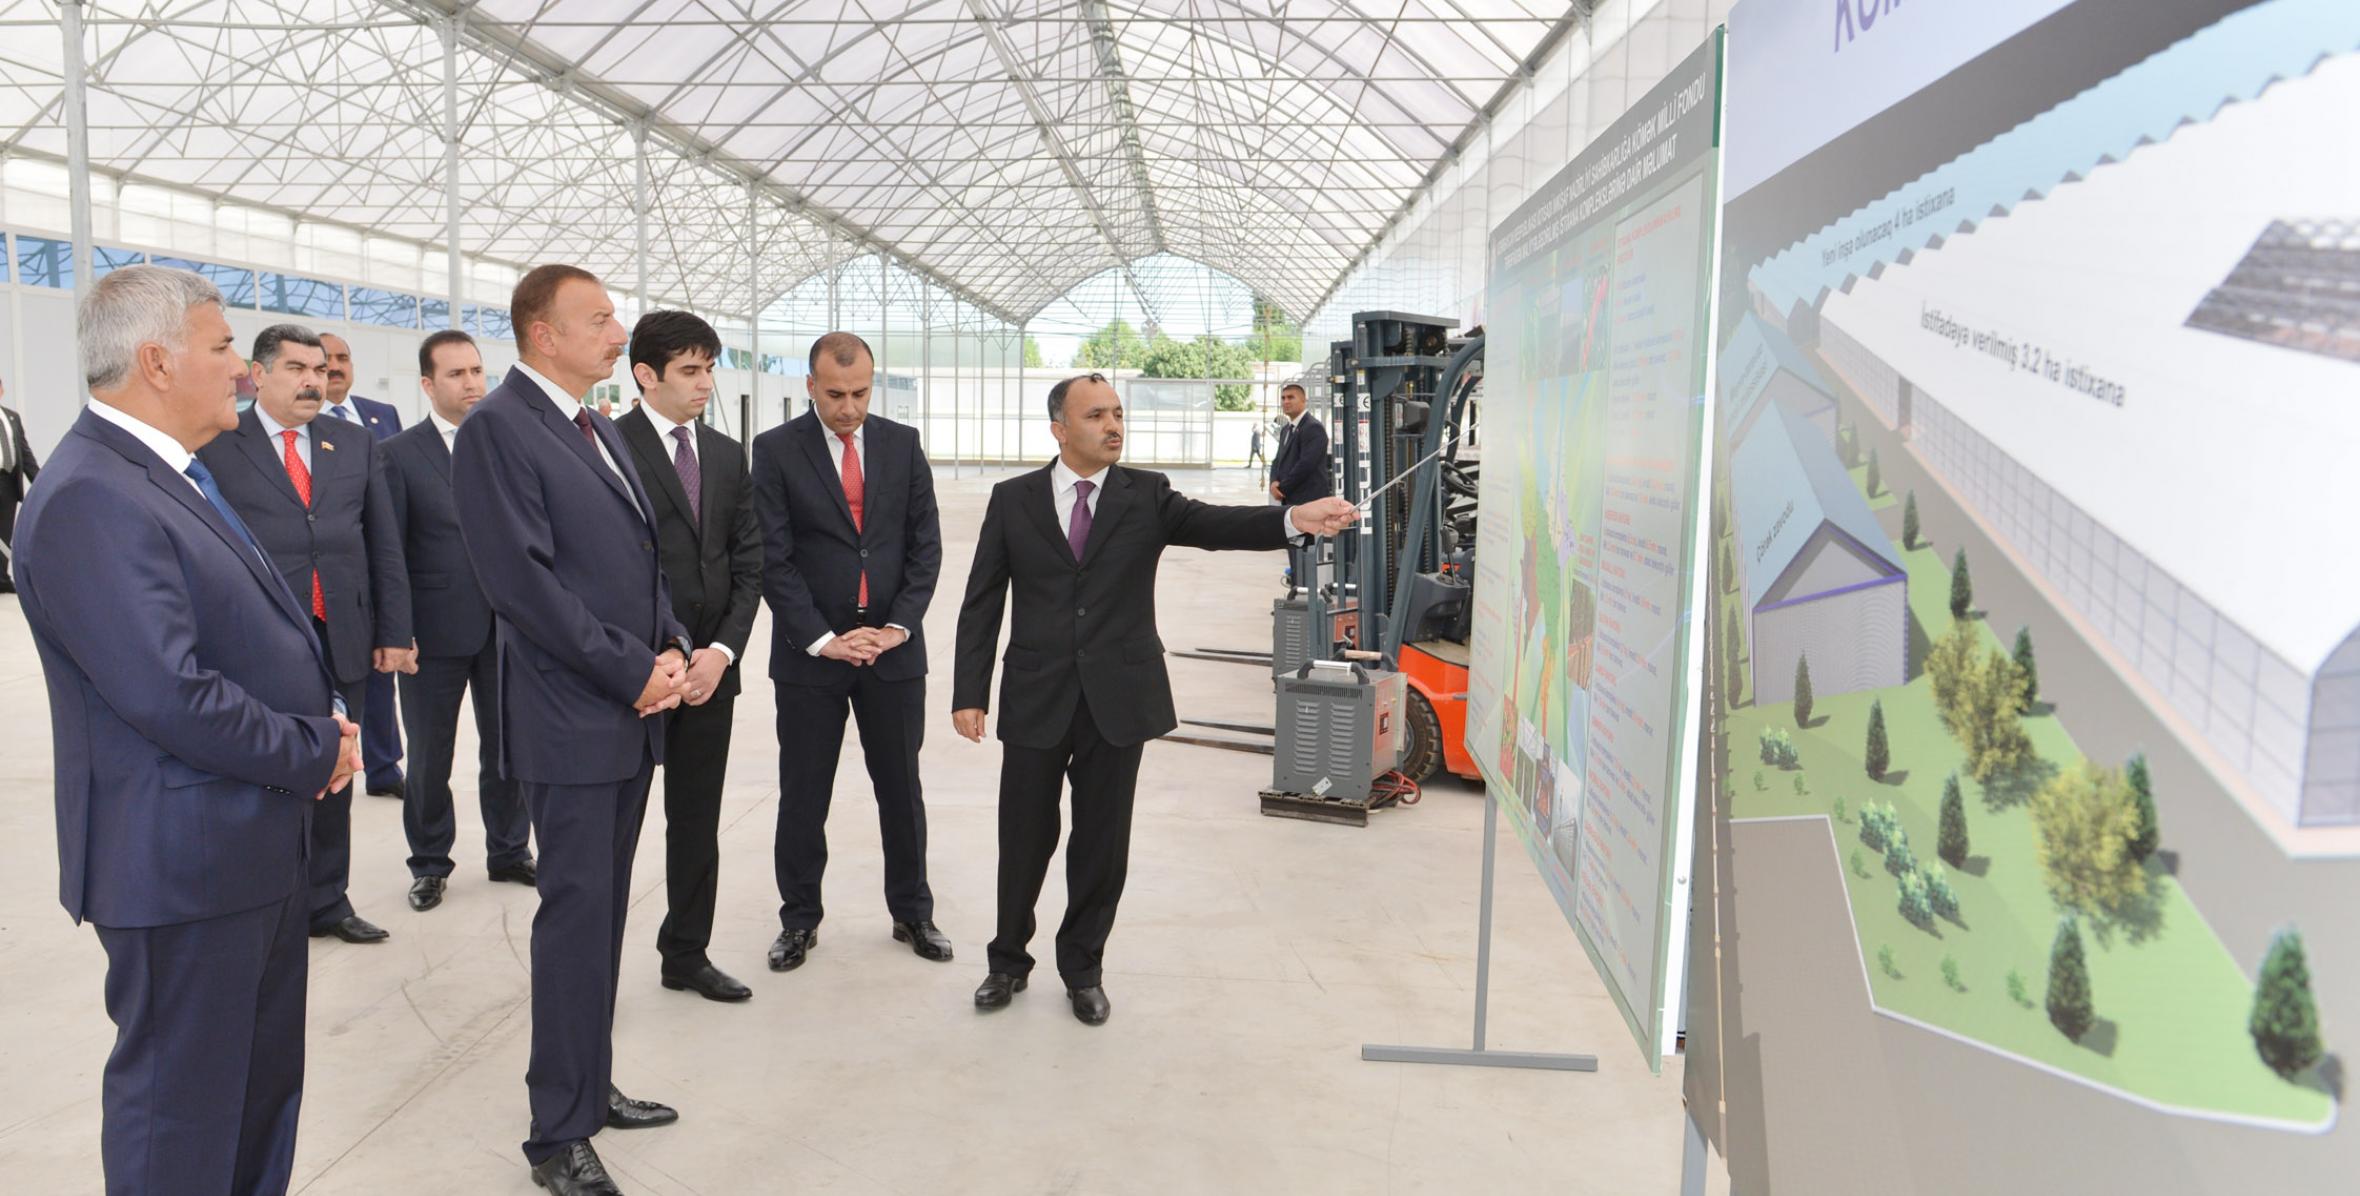 Ilham Aliyev attended the opening of a modern greenhouse complex in Sabirabad